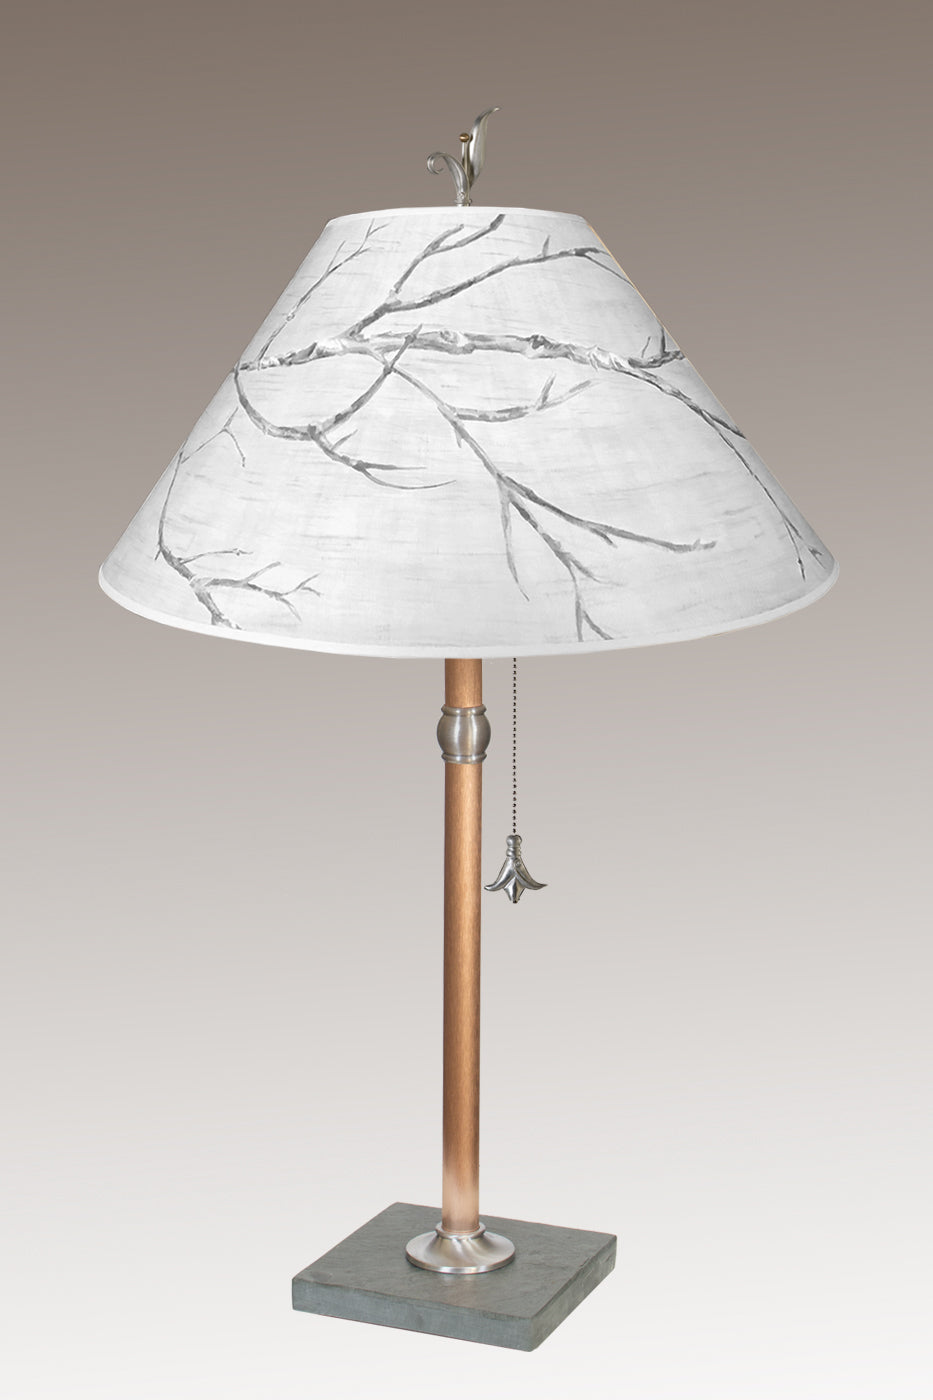 Janna Ugone &amp; Co Table Lamps Copper Table Lamp with Large Conical Shade in Sweeping Branch